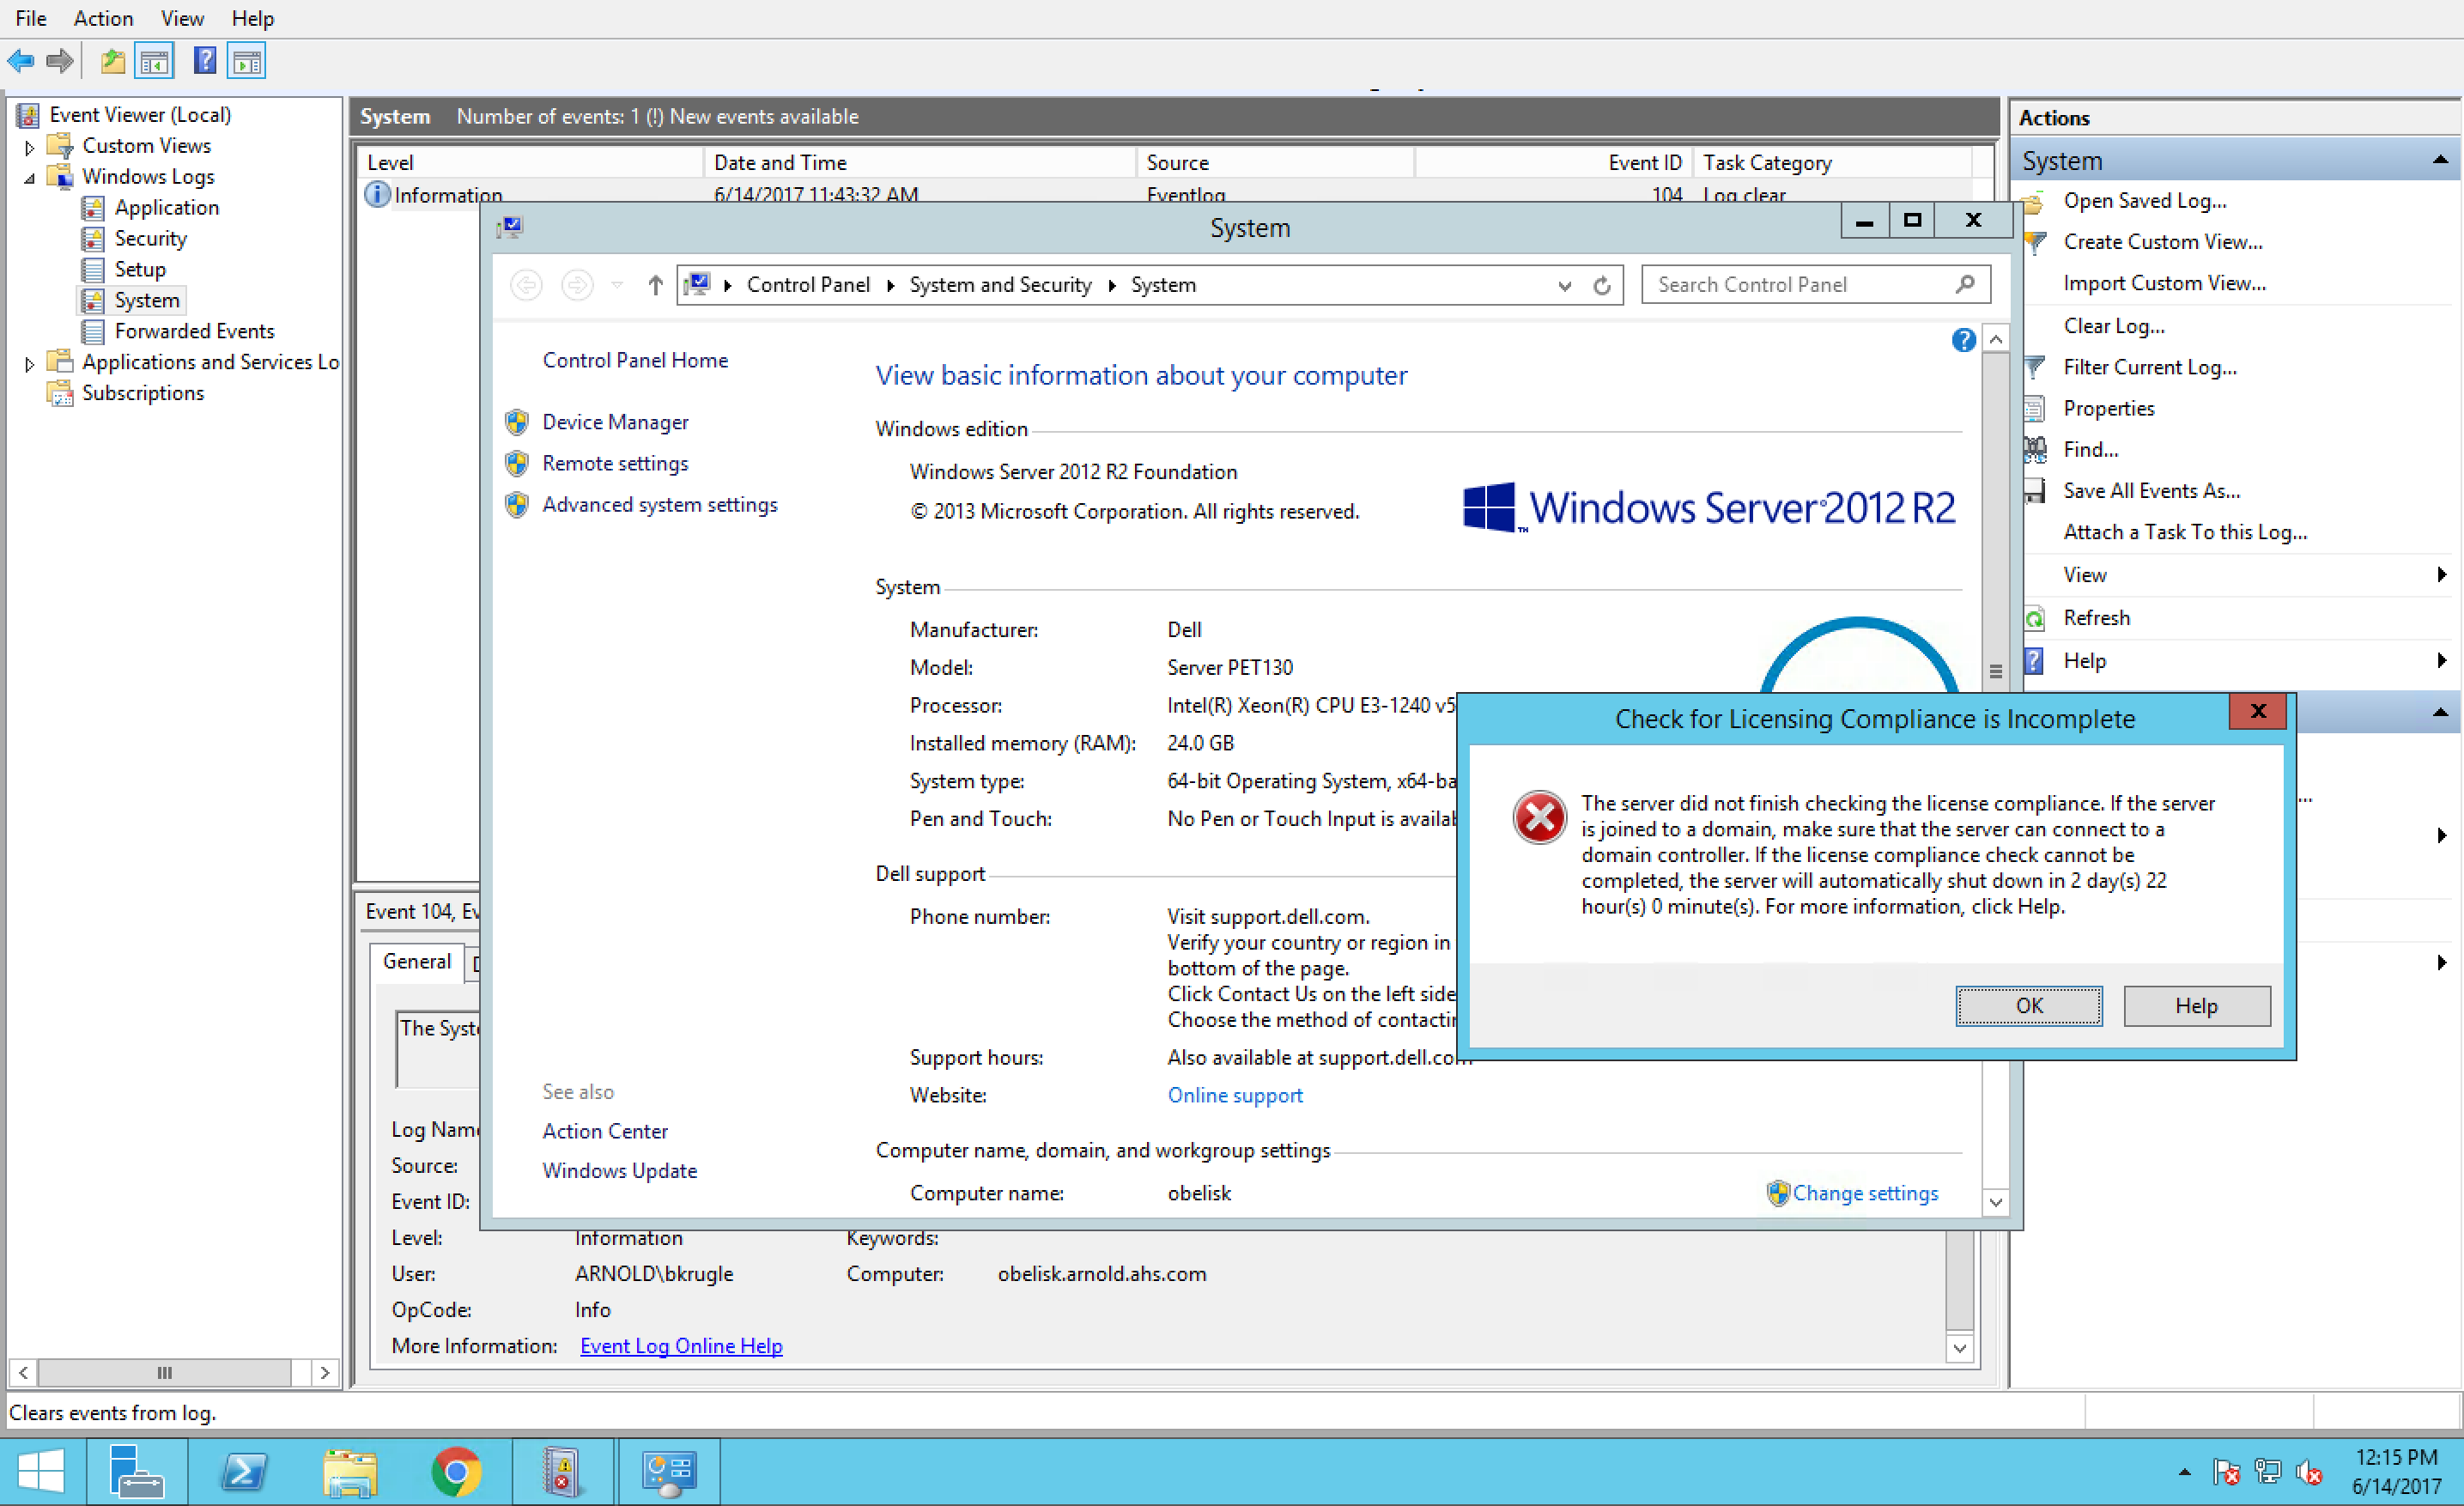 Windows Server 2012 R2 Foundation Check For Licensing Compliance